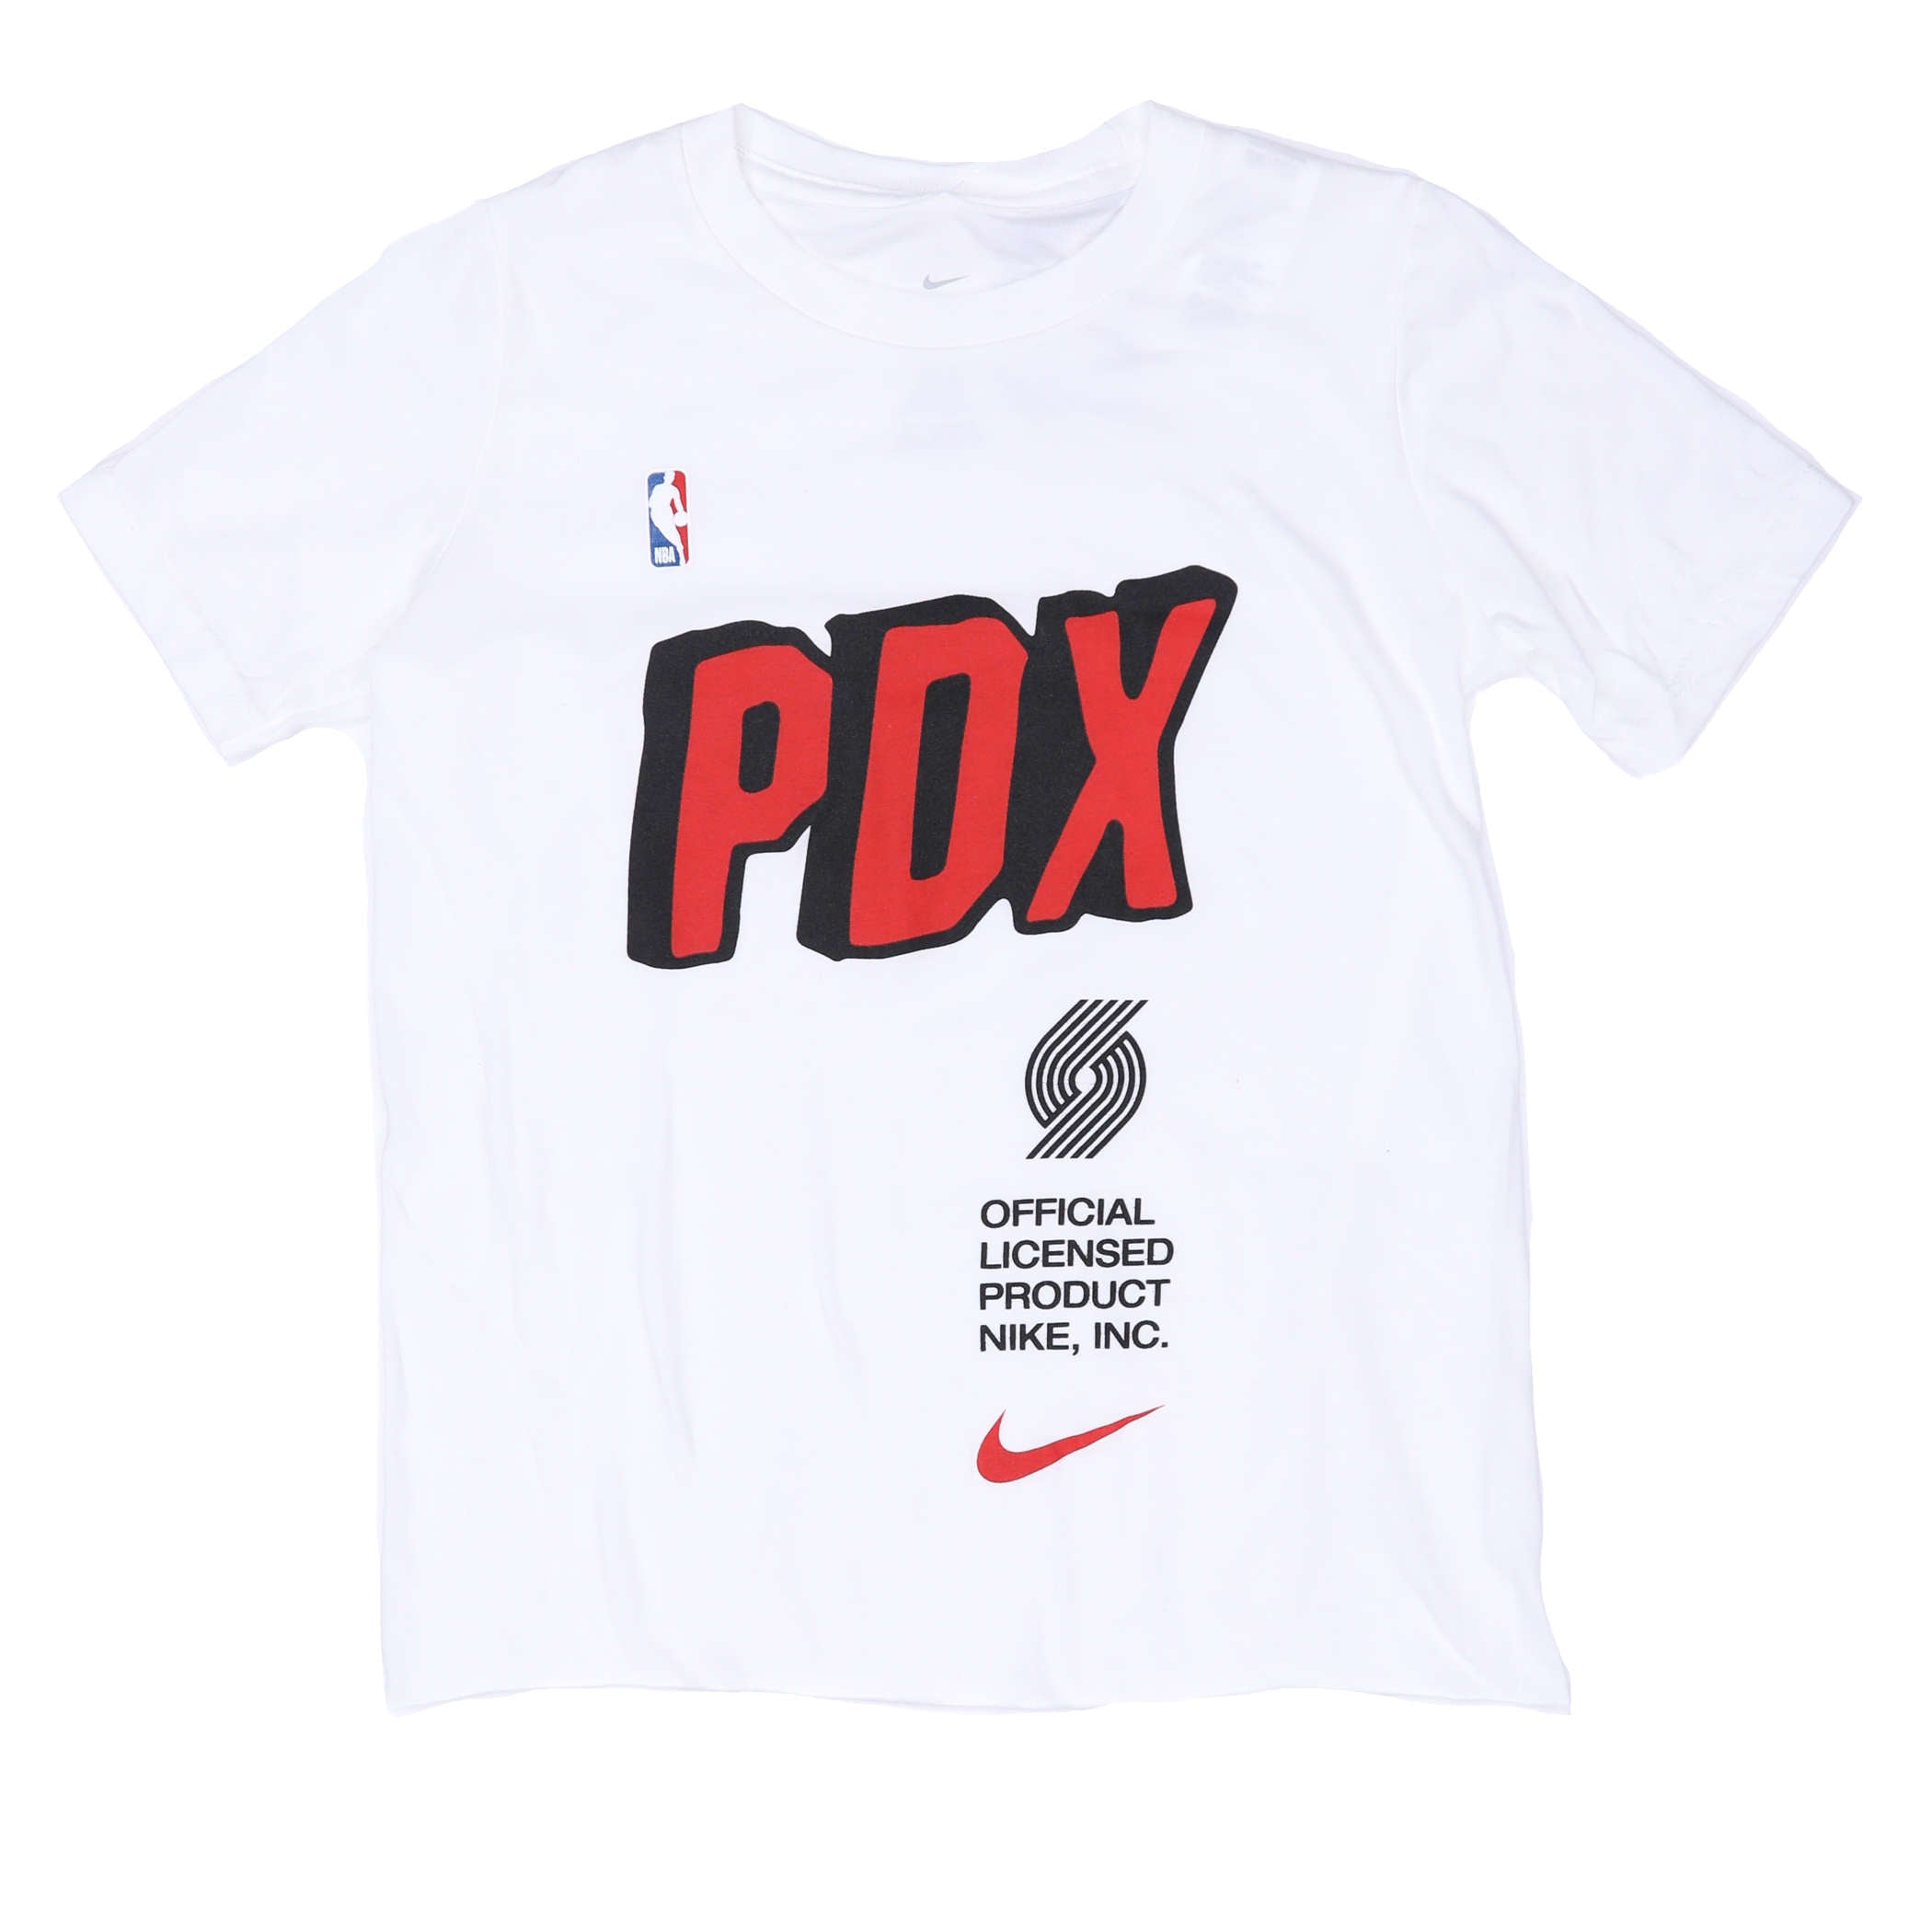 Portland Trail Blazers PDX City Edition Nike Youth Block Tee - Youth S - 